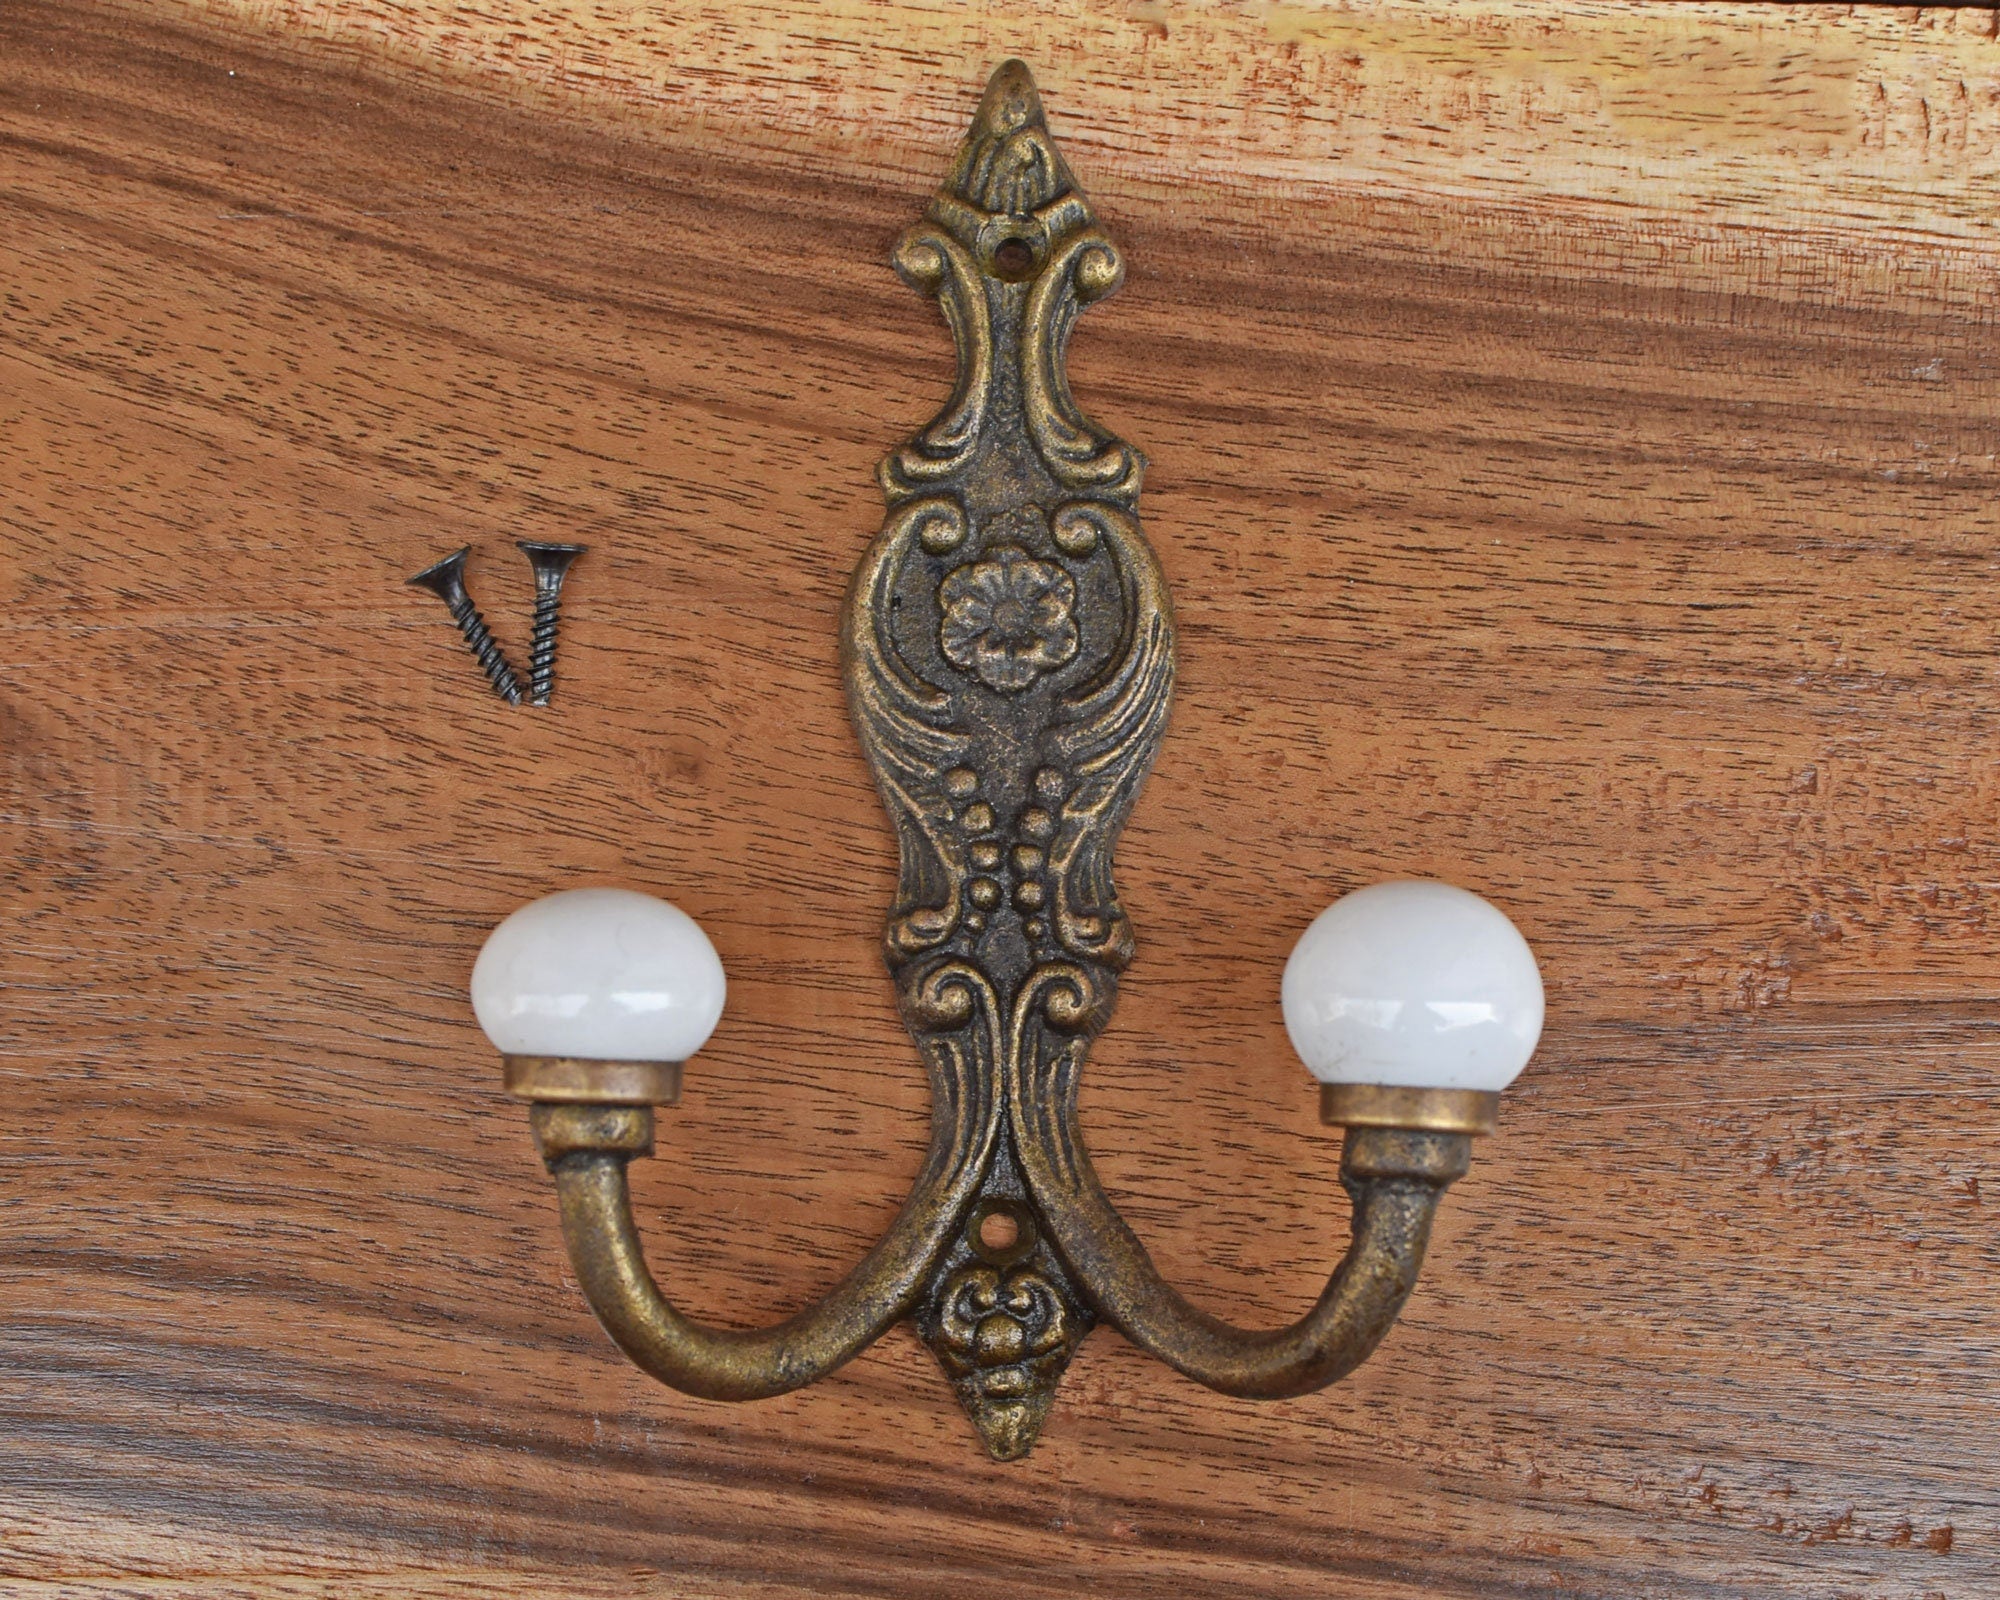 Cast Iron Coat Hook with Ceramic Knobs,Antique Wall Hook, Towel